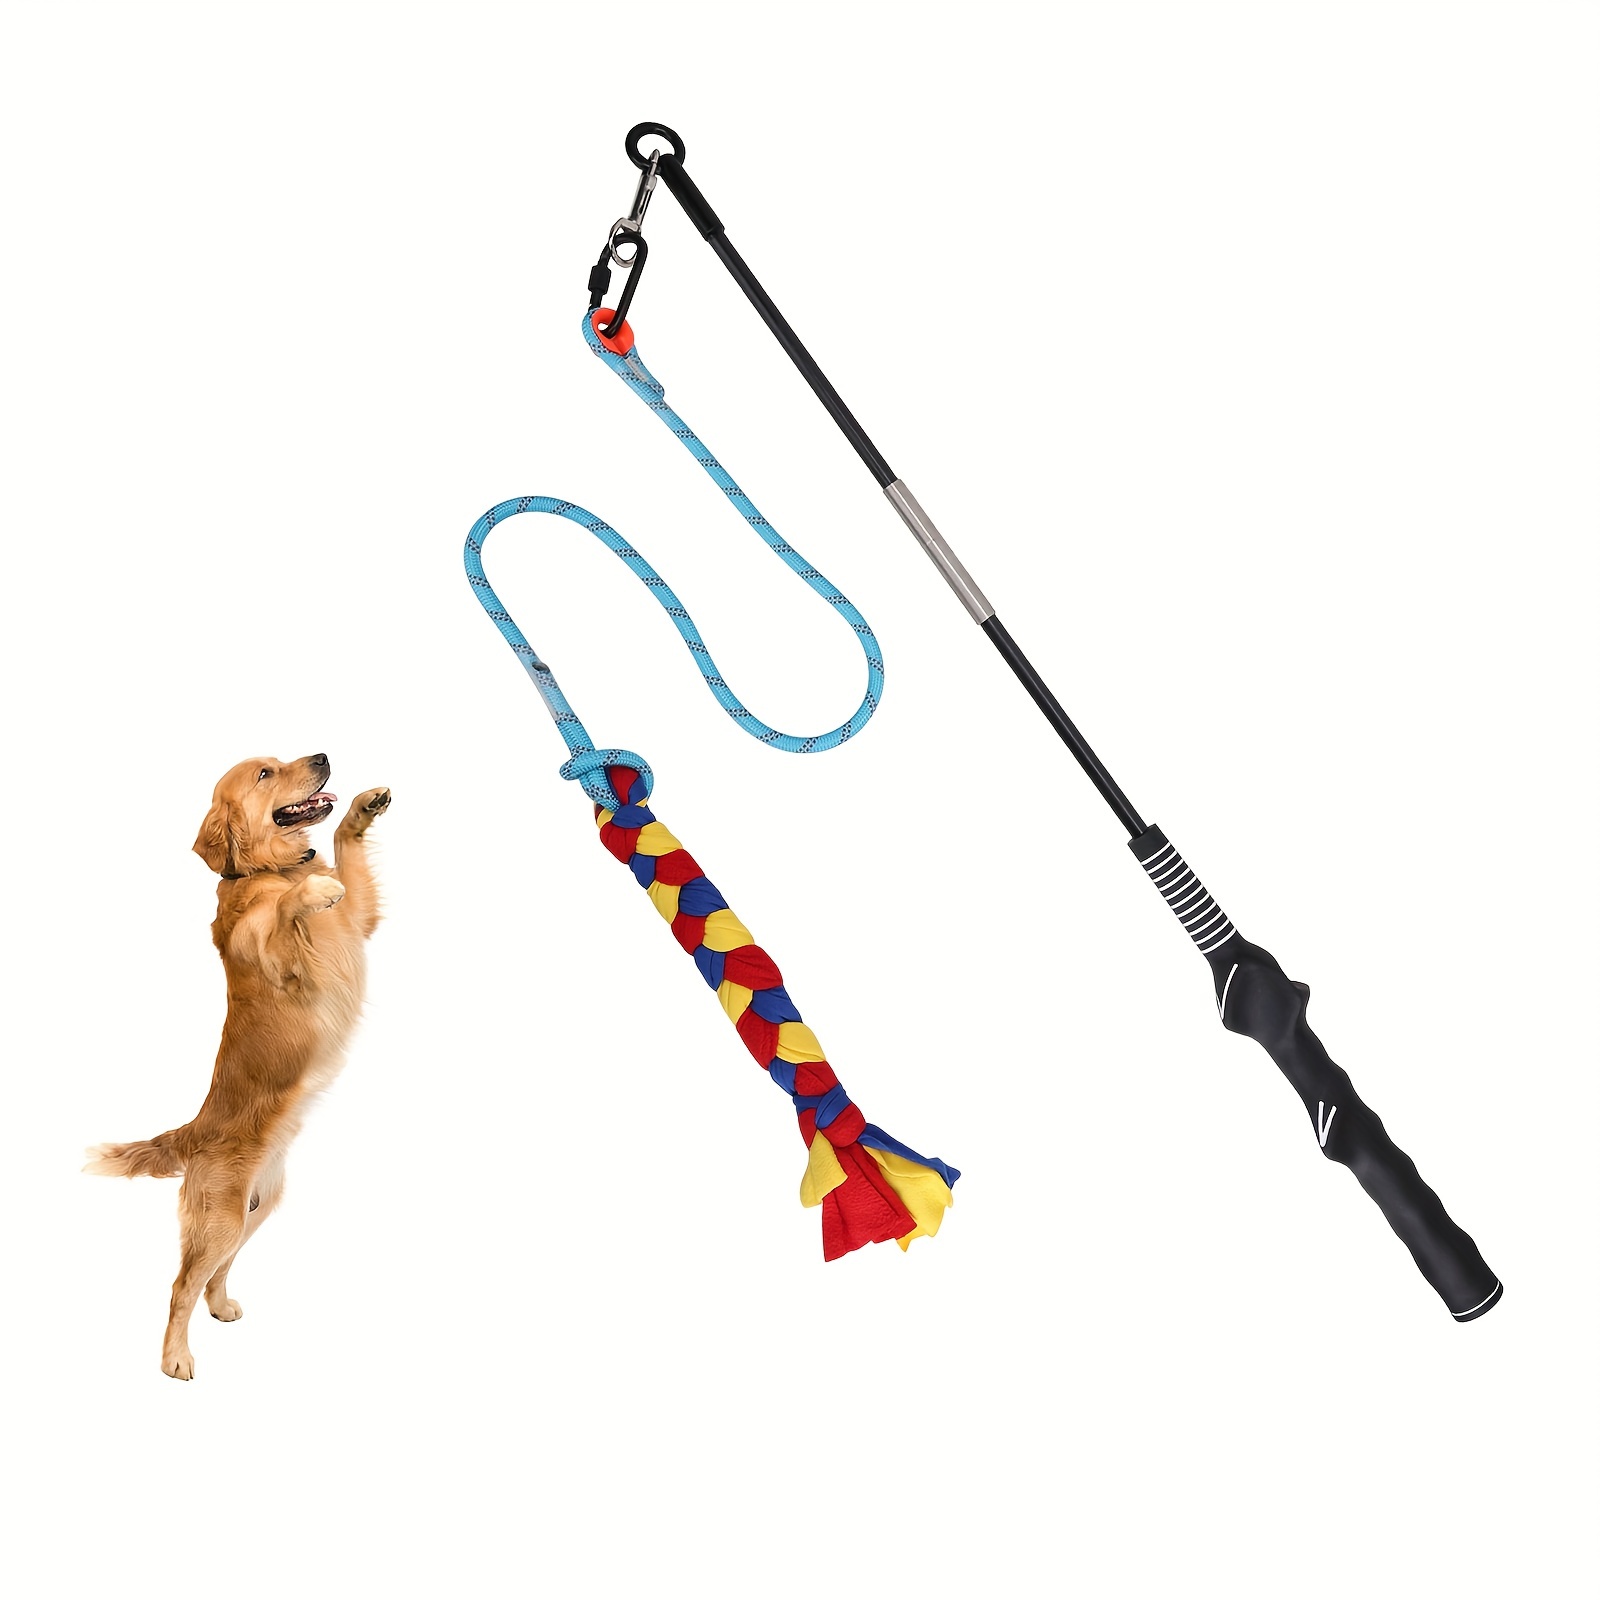 

Interactive Dog Toys Dog Flirt Pole Toy Dog And Tug Of War Toy Dog Teaser Wand With Lure Chewing Toy For Outdoor Dogs Exercise, Training And Play Accessories